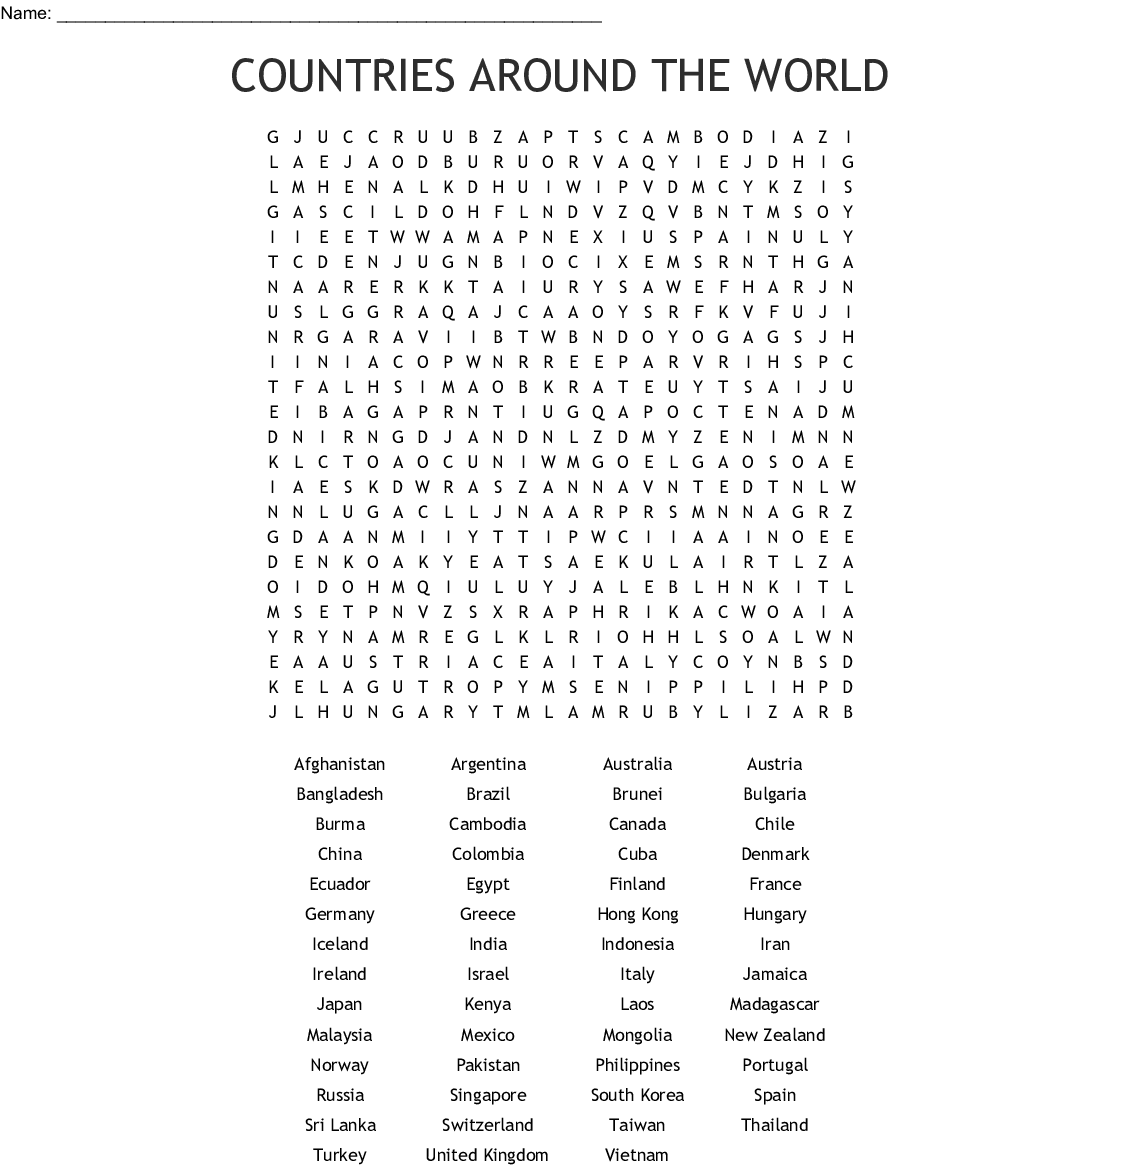 countries-of-the-world-word-search-puzzle-word-puzzles-for-kids-word